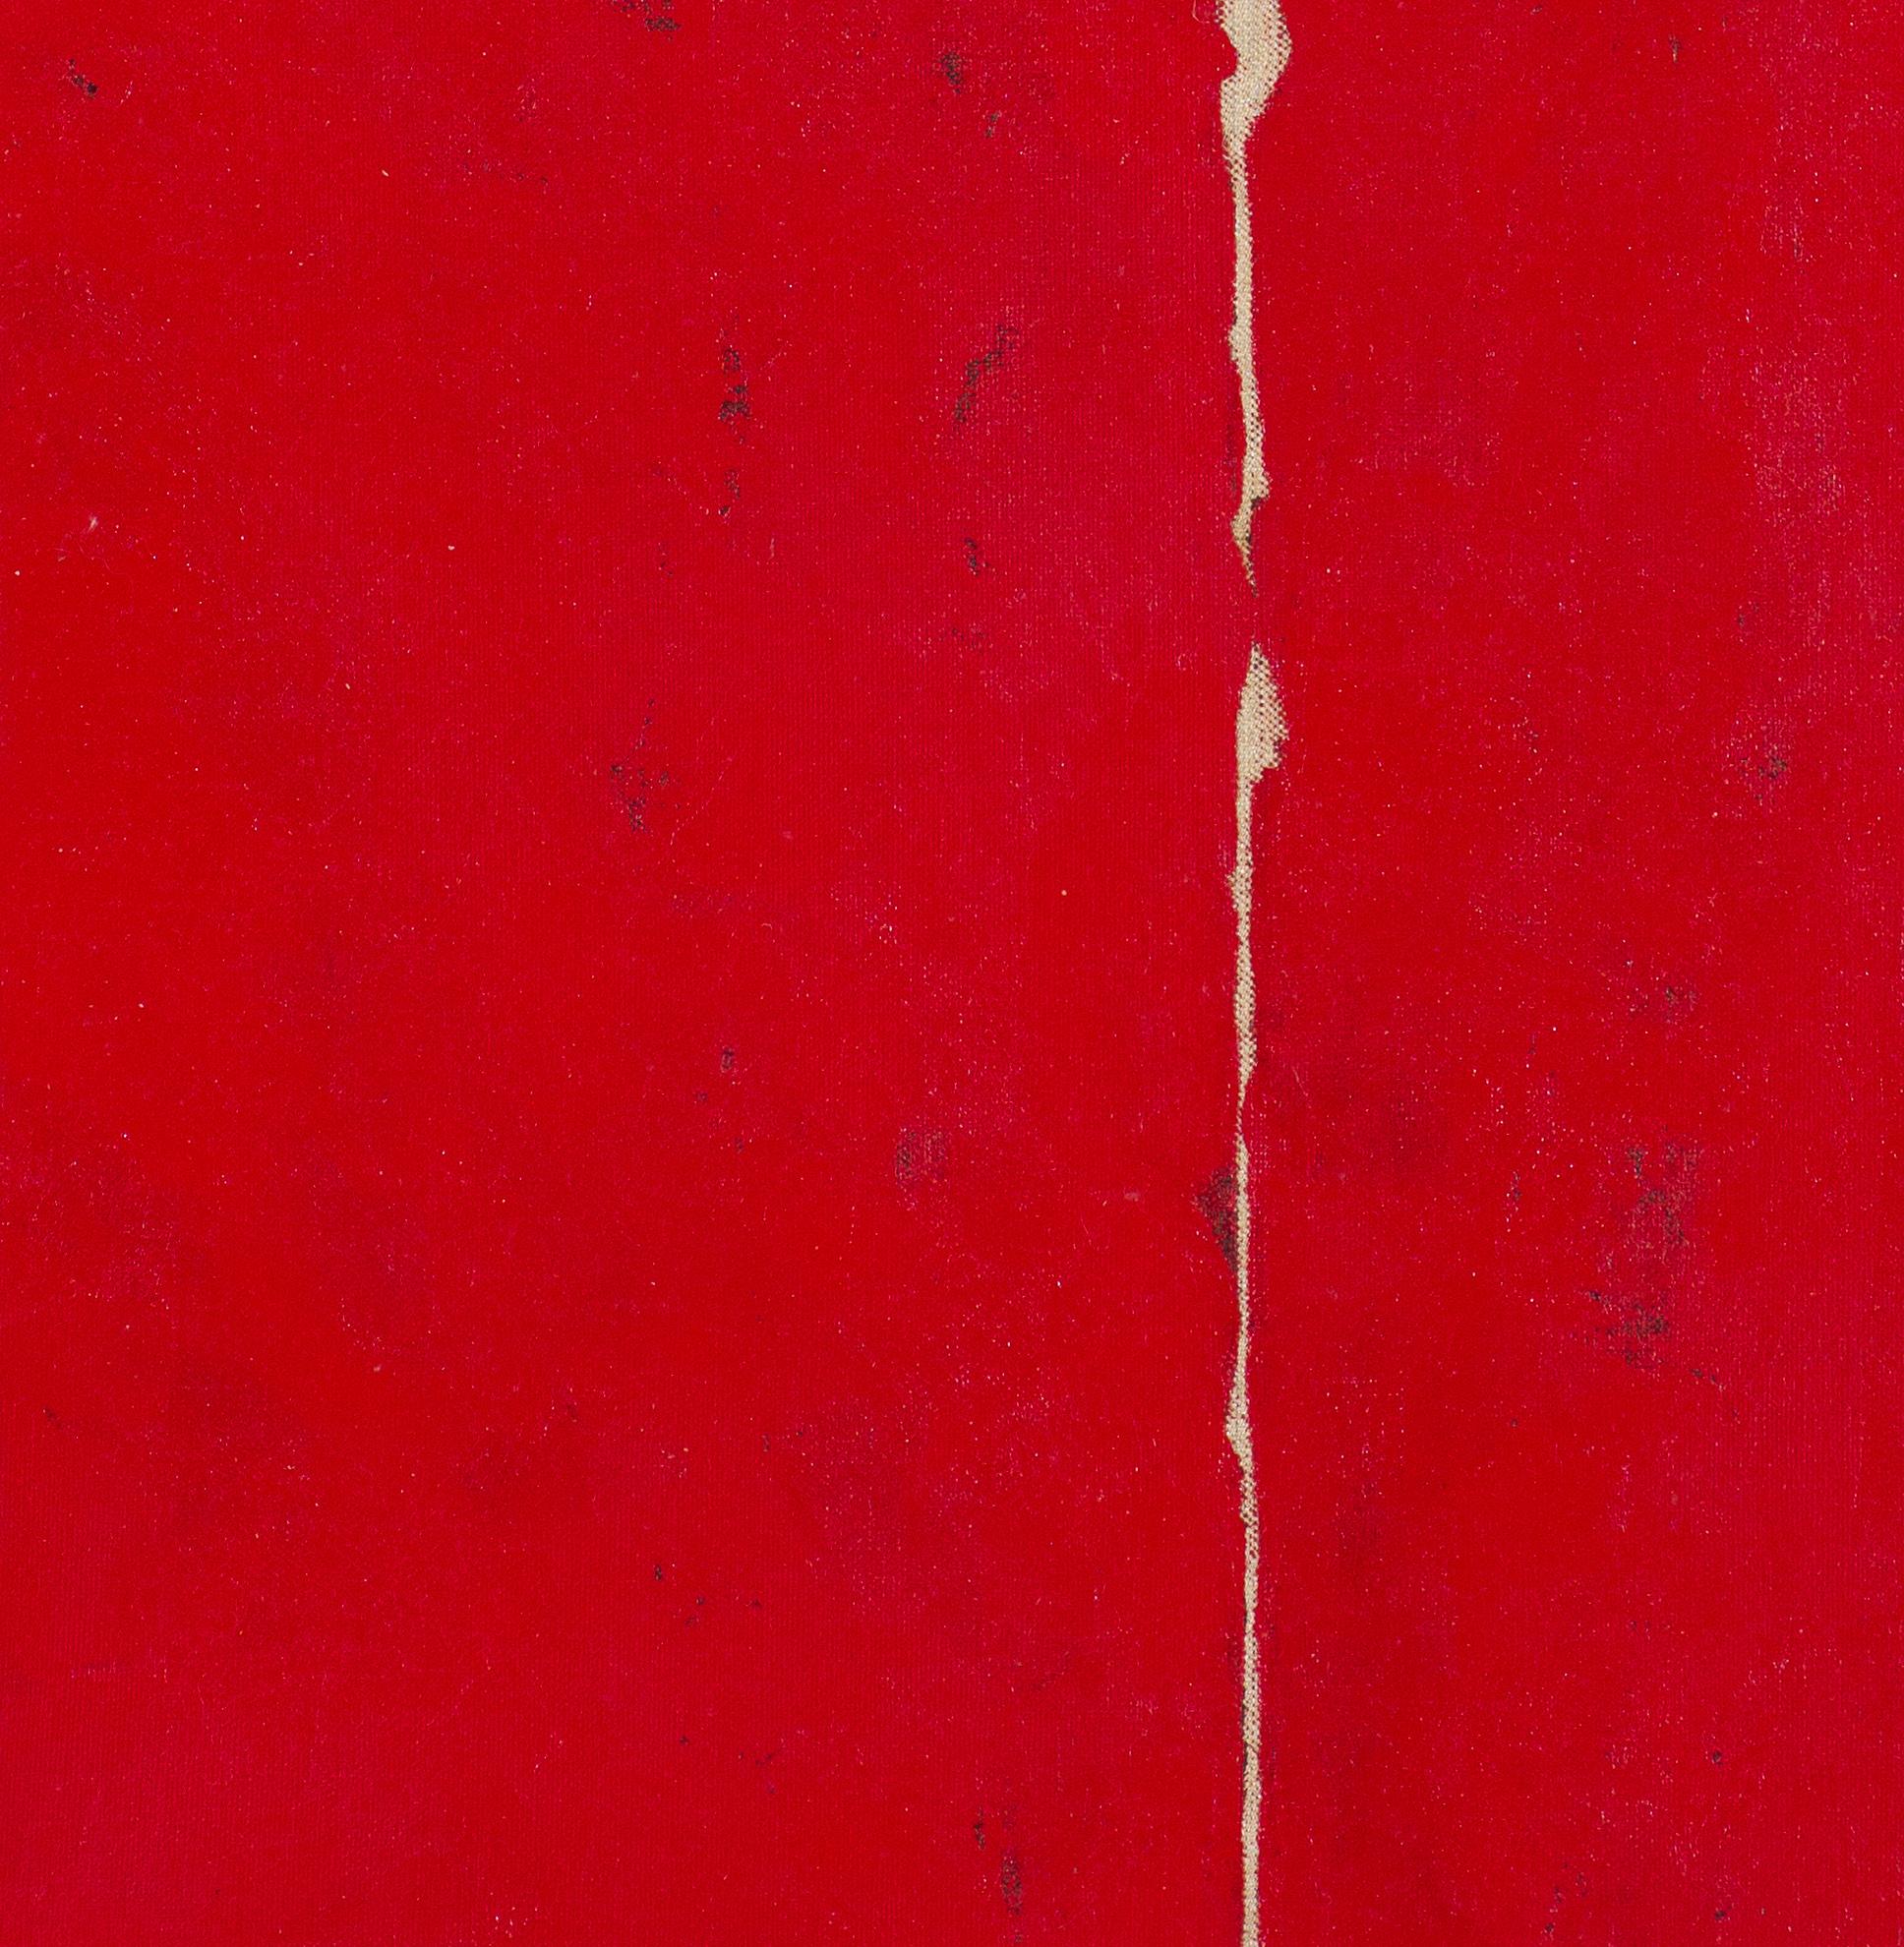 1978 (red) - Red Abstract Painting by Mala Breuer